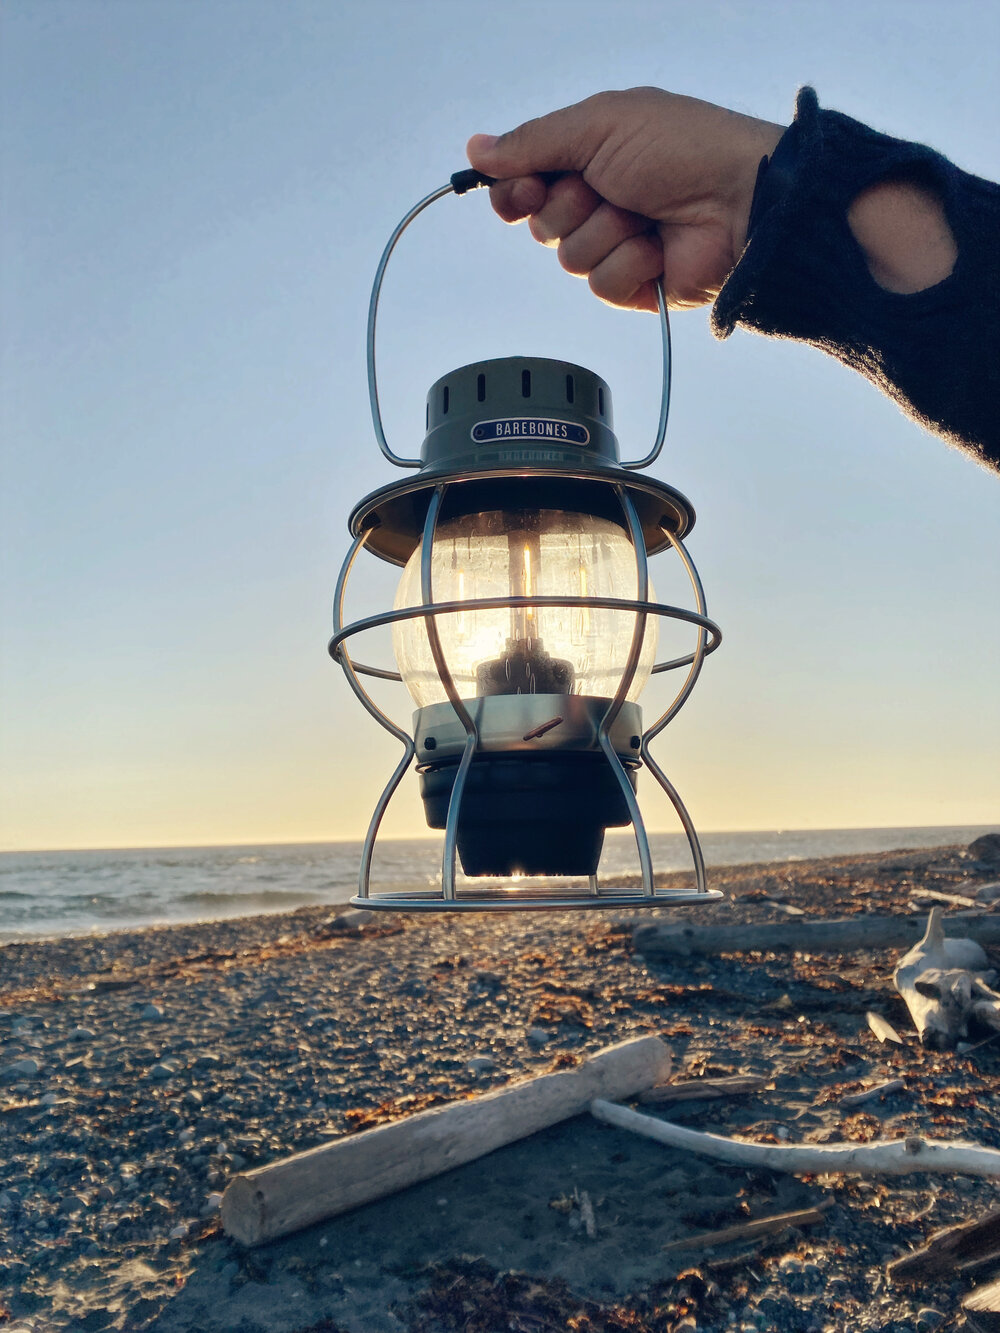 Barebones Railroad Lantern at Sunset at Fort Casey with views of the Puget Sound from Whidbey Island